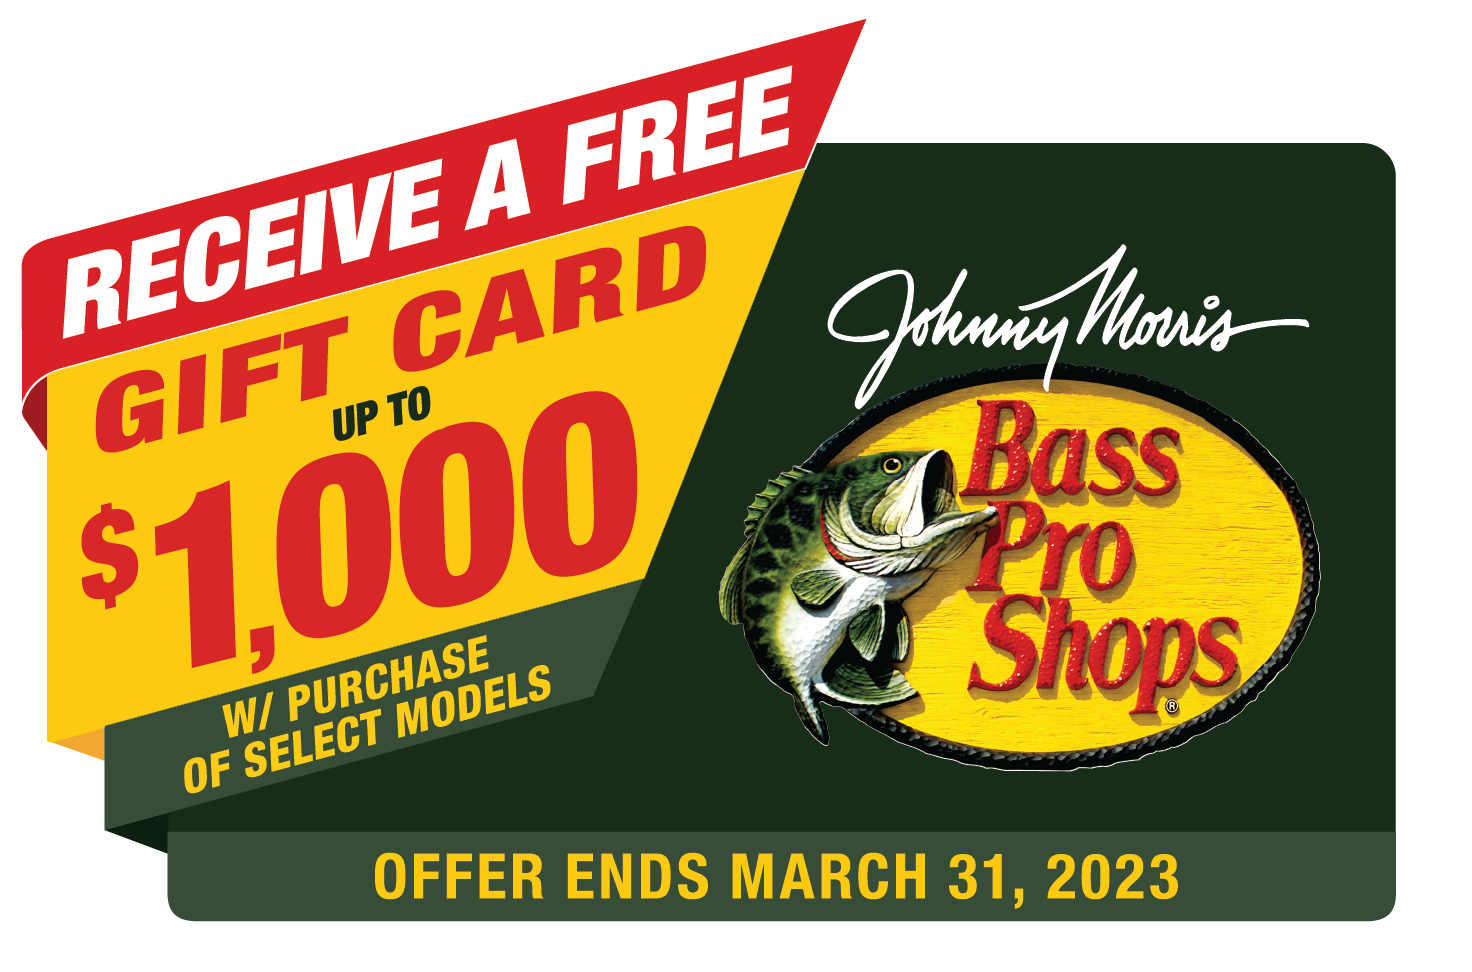 Receive a Free Gift Card up to $1,000 with purchase